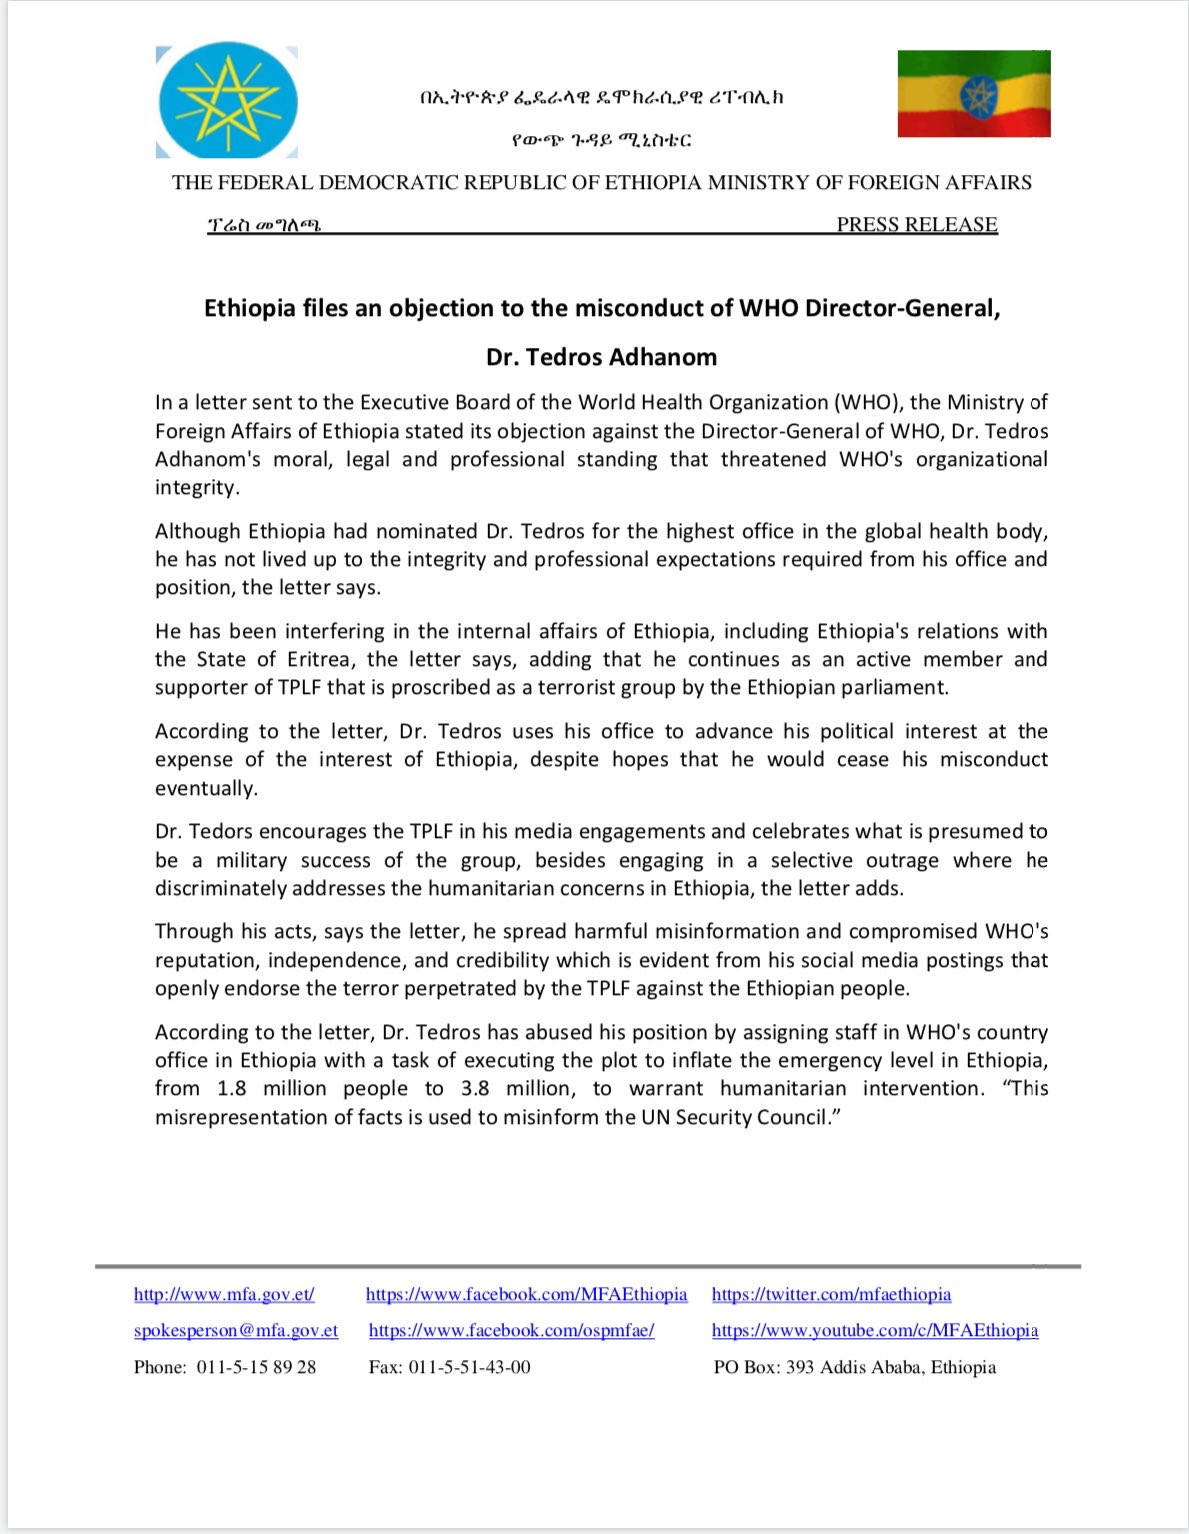 #Ethiopia files an objection to the misconduct of #WHO Director-General, @DrTedros